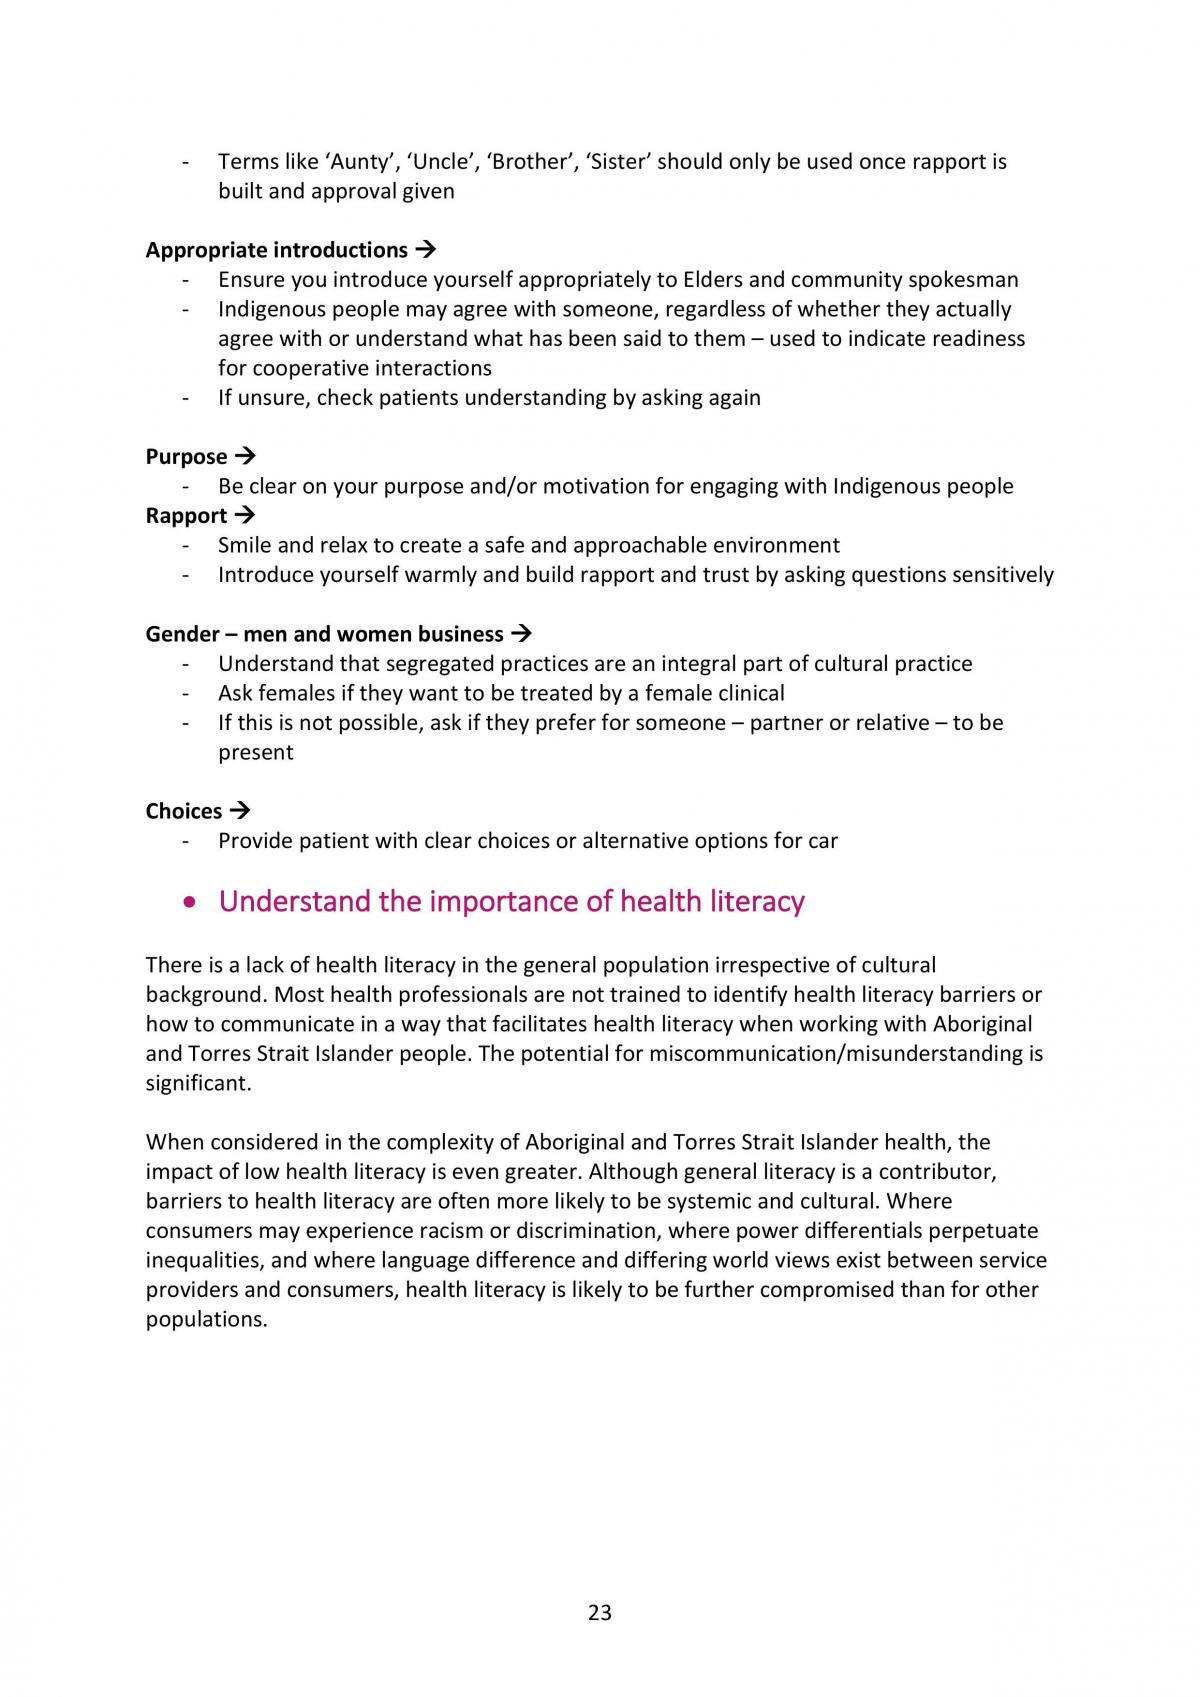 401206 Full Study Notes  - Page 24